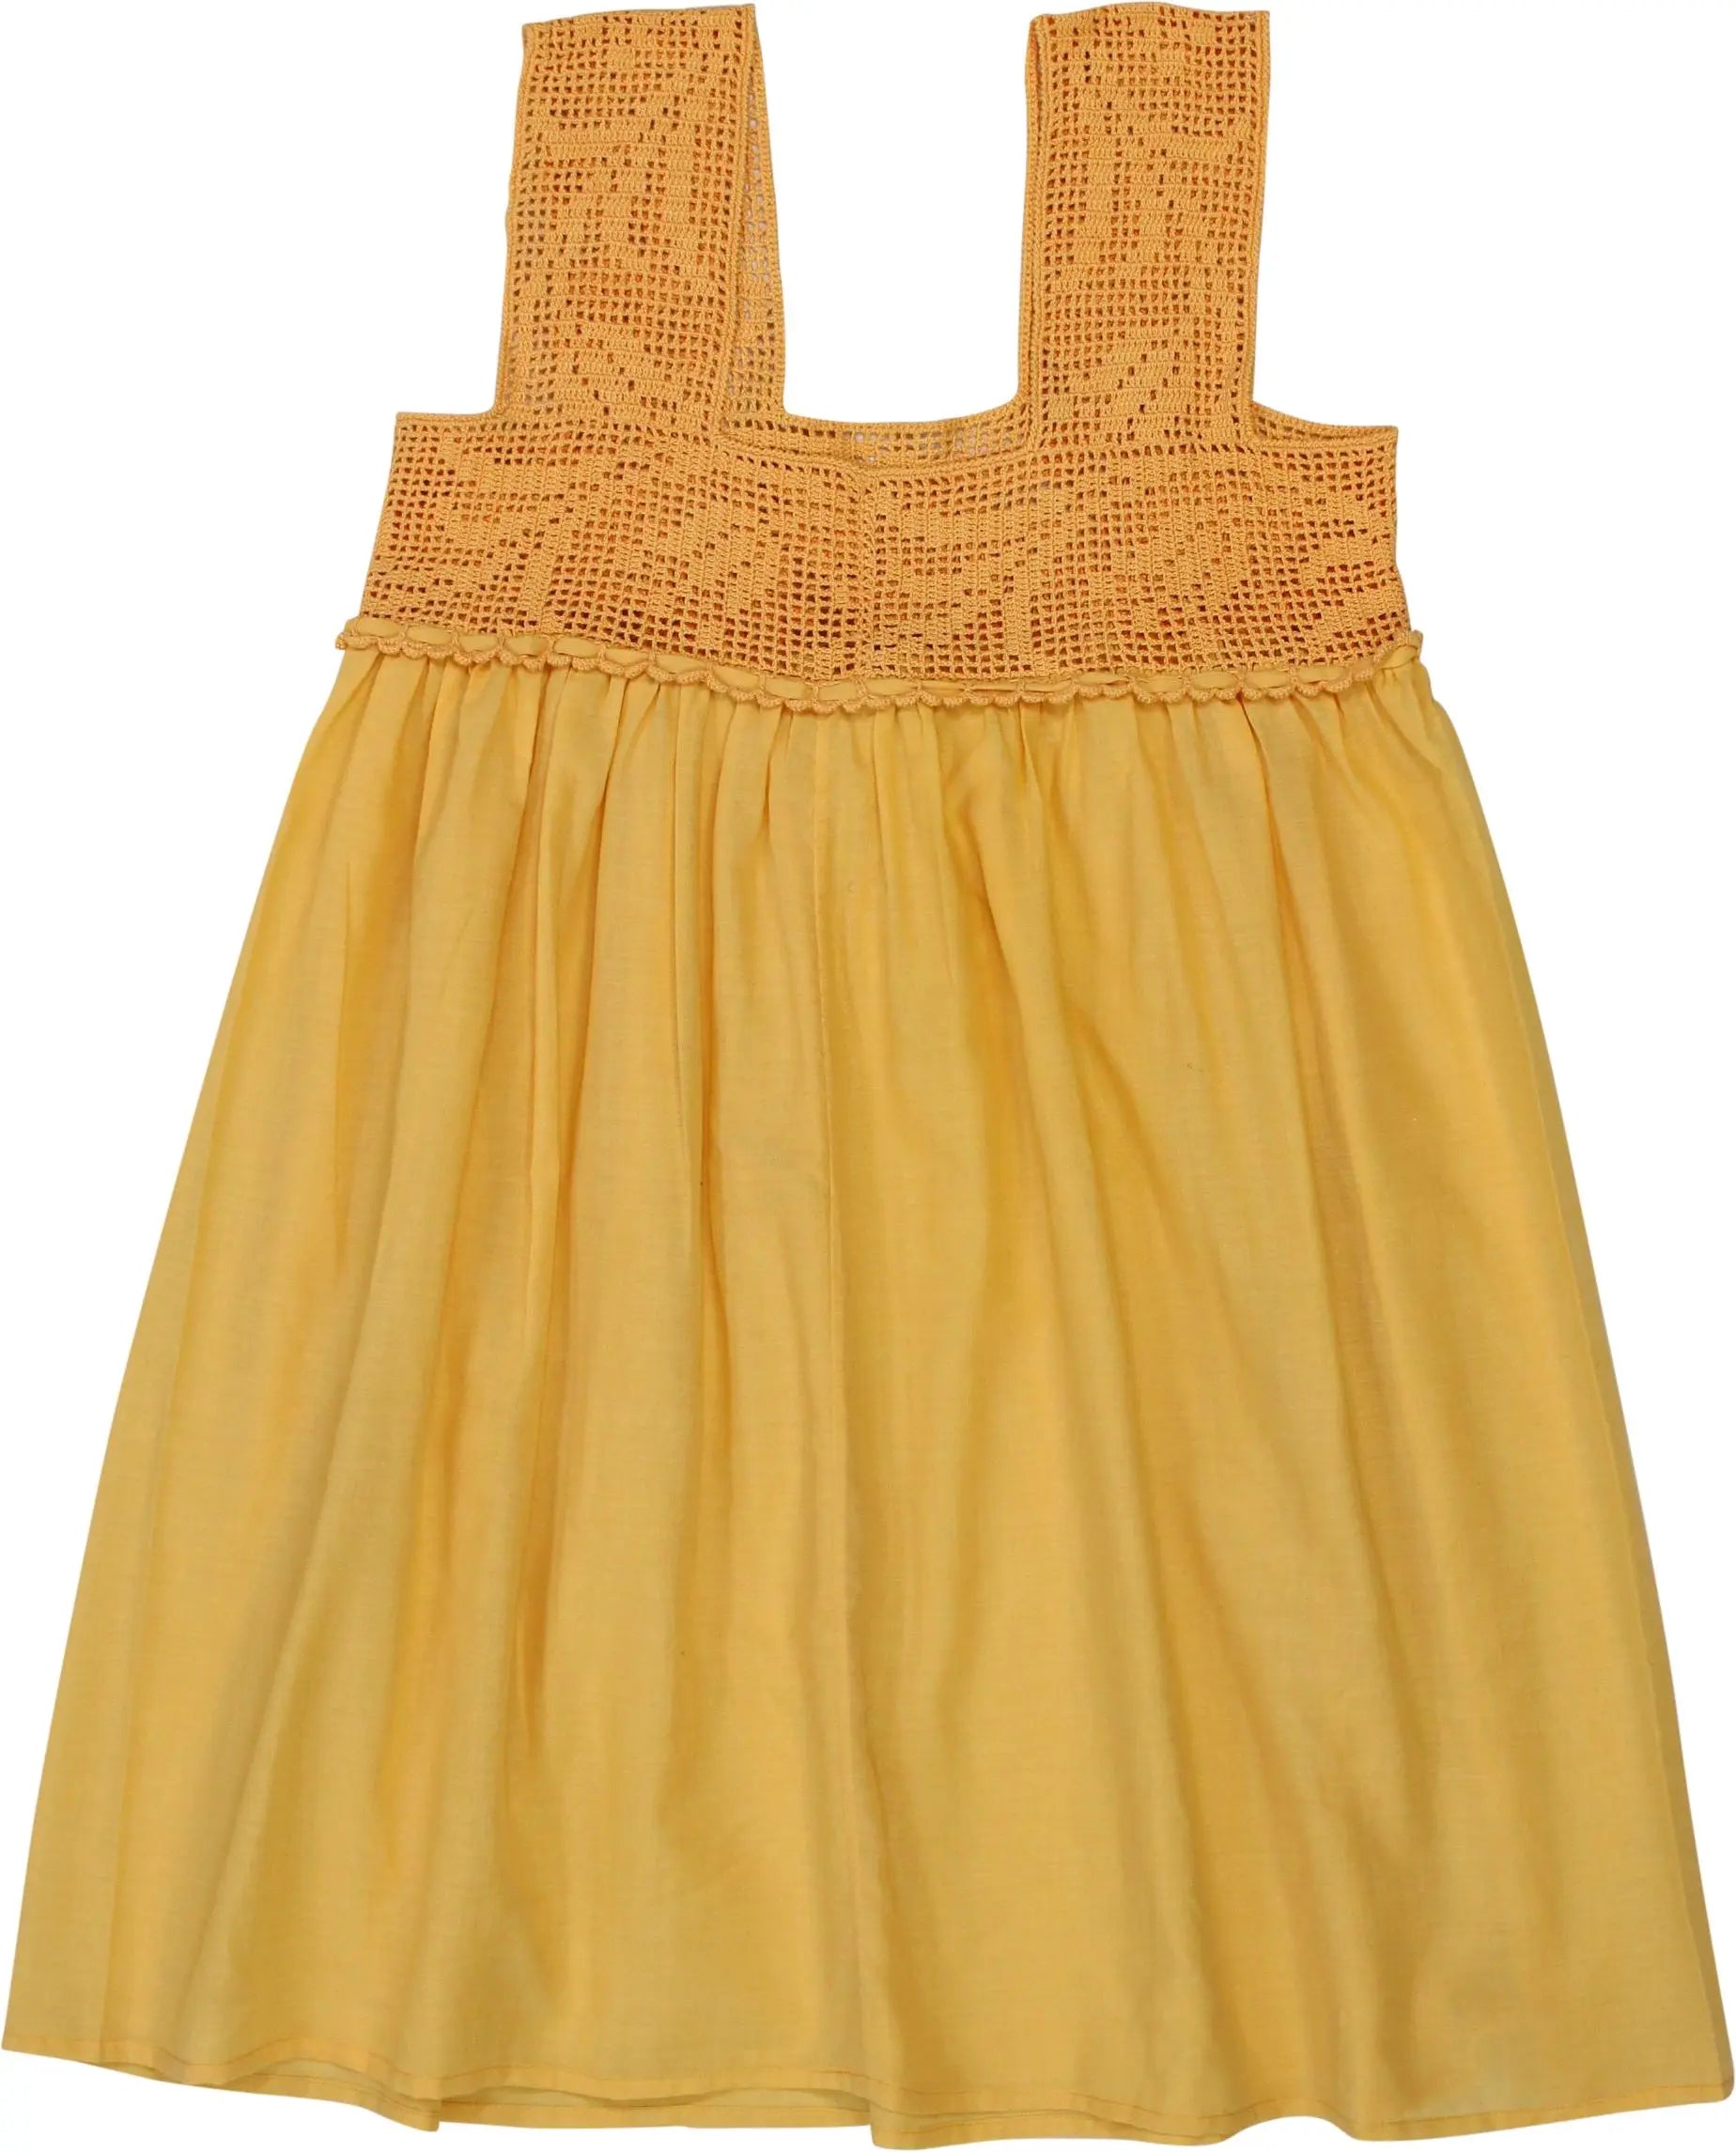 Unknown - Yellow Dress- ThriftTale.com - Vintage and second handclothing